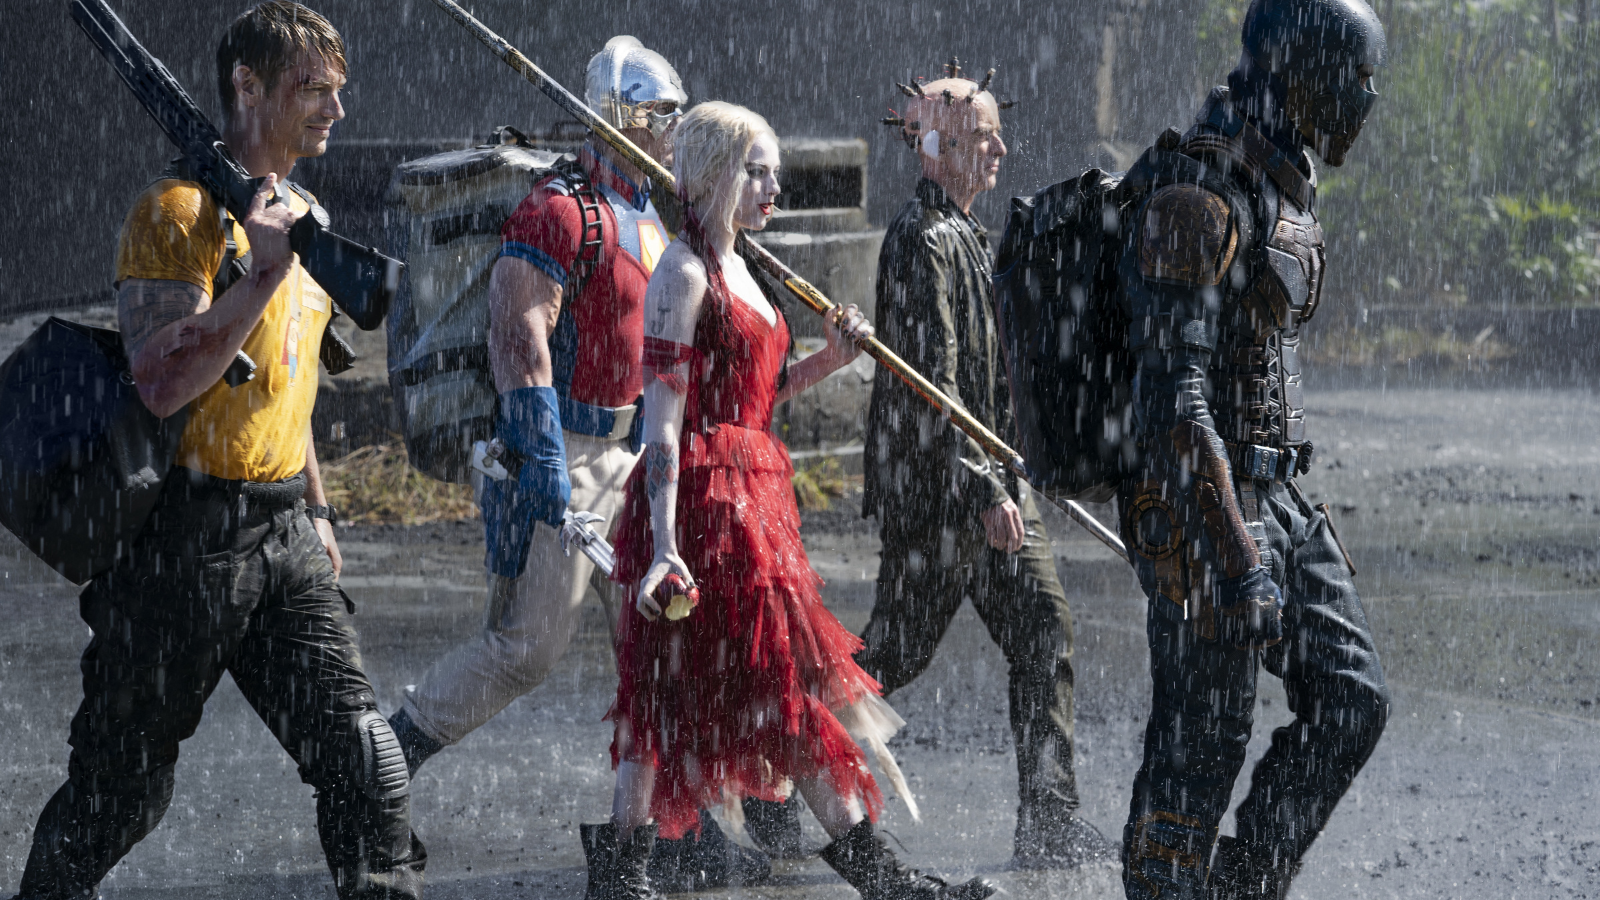 Harley Quinn (Margot Robbie), Bloodsport (Idris Elba), Colonel Rick Flag (Joel Kinnaman), and Peacemaker (John Cena) walk heroically during a downpour in 'The Suicide Squad' (2021).